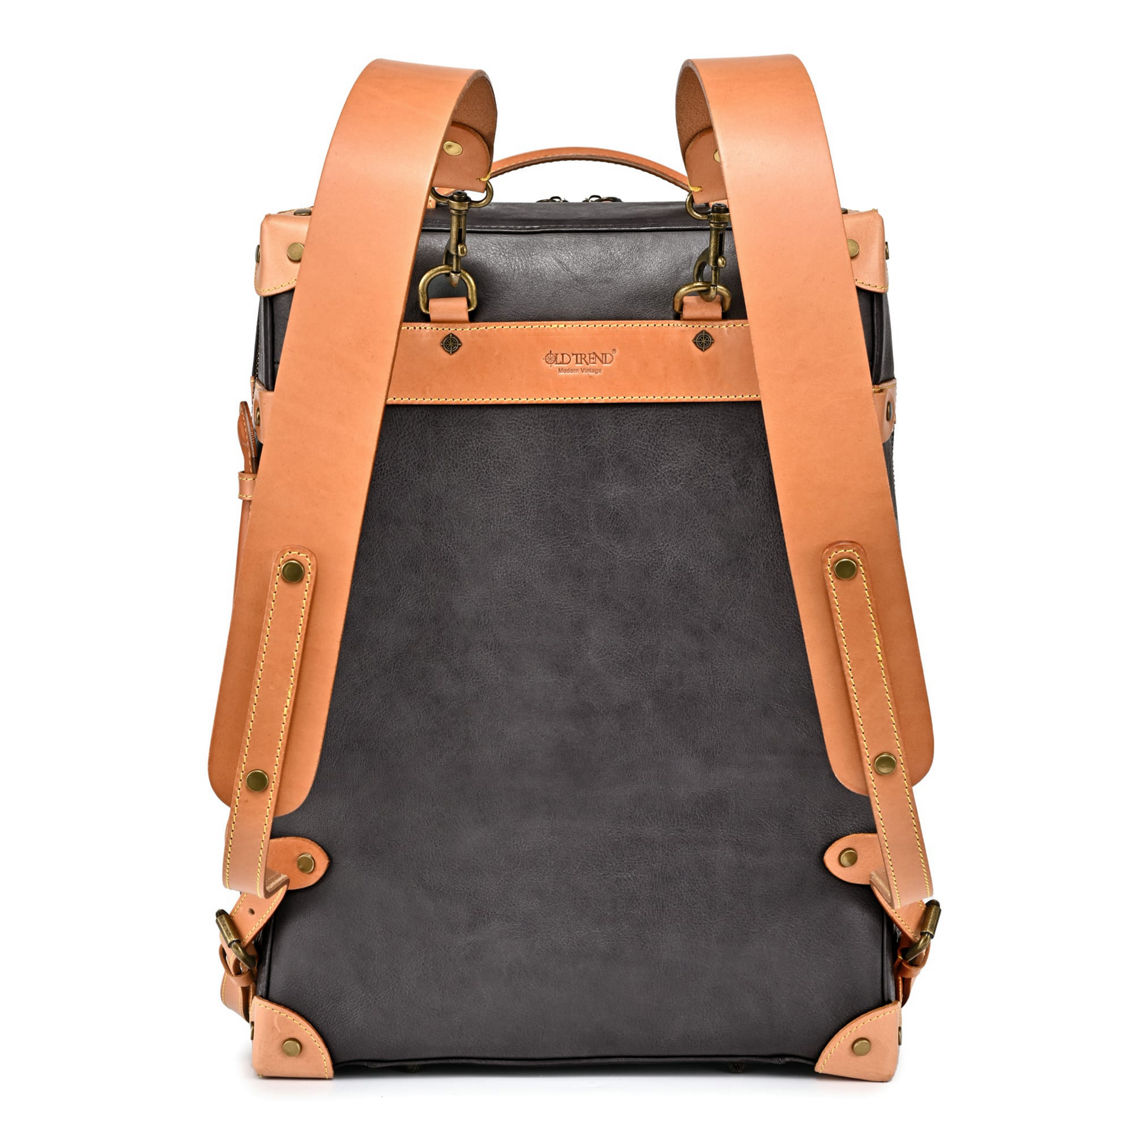 Old Trend Speedwell Trunk Leather Backpack - Image 5 of 5